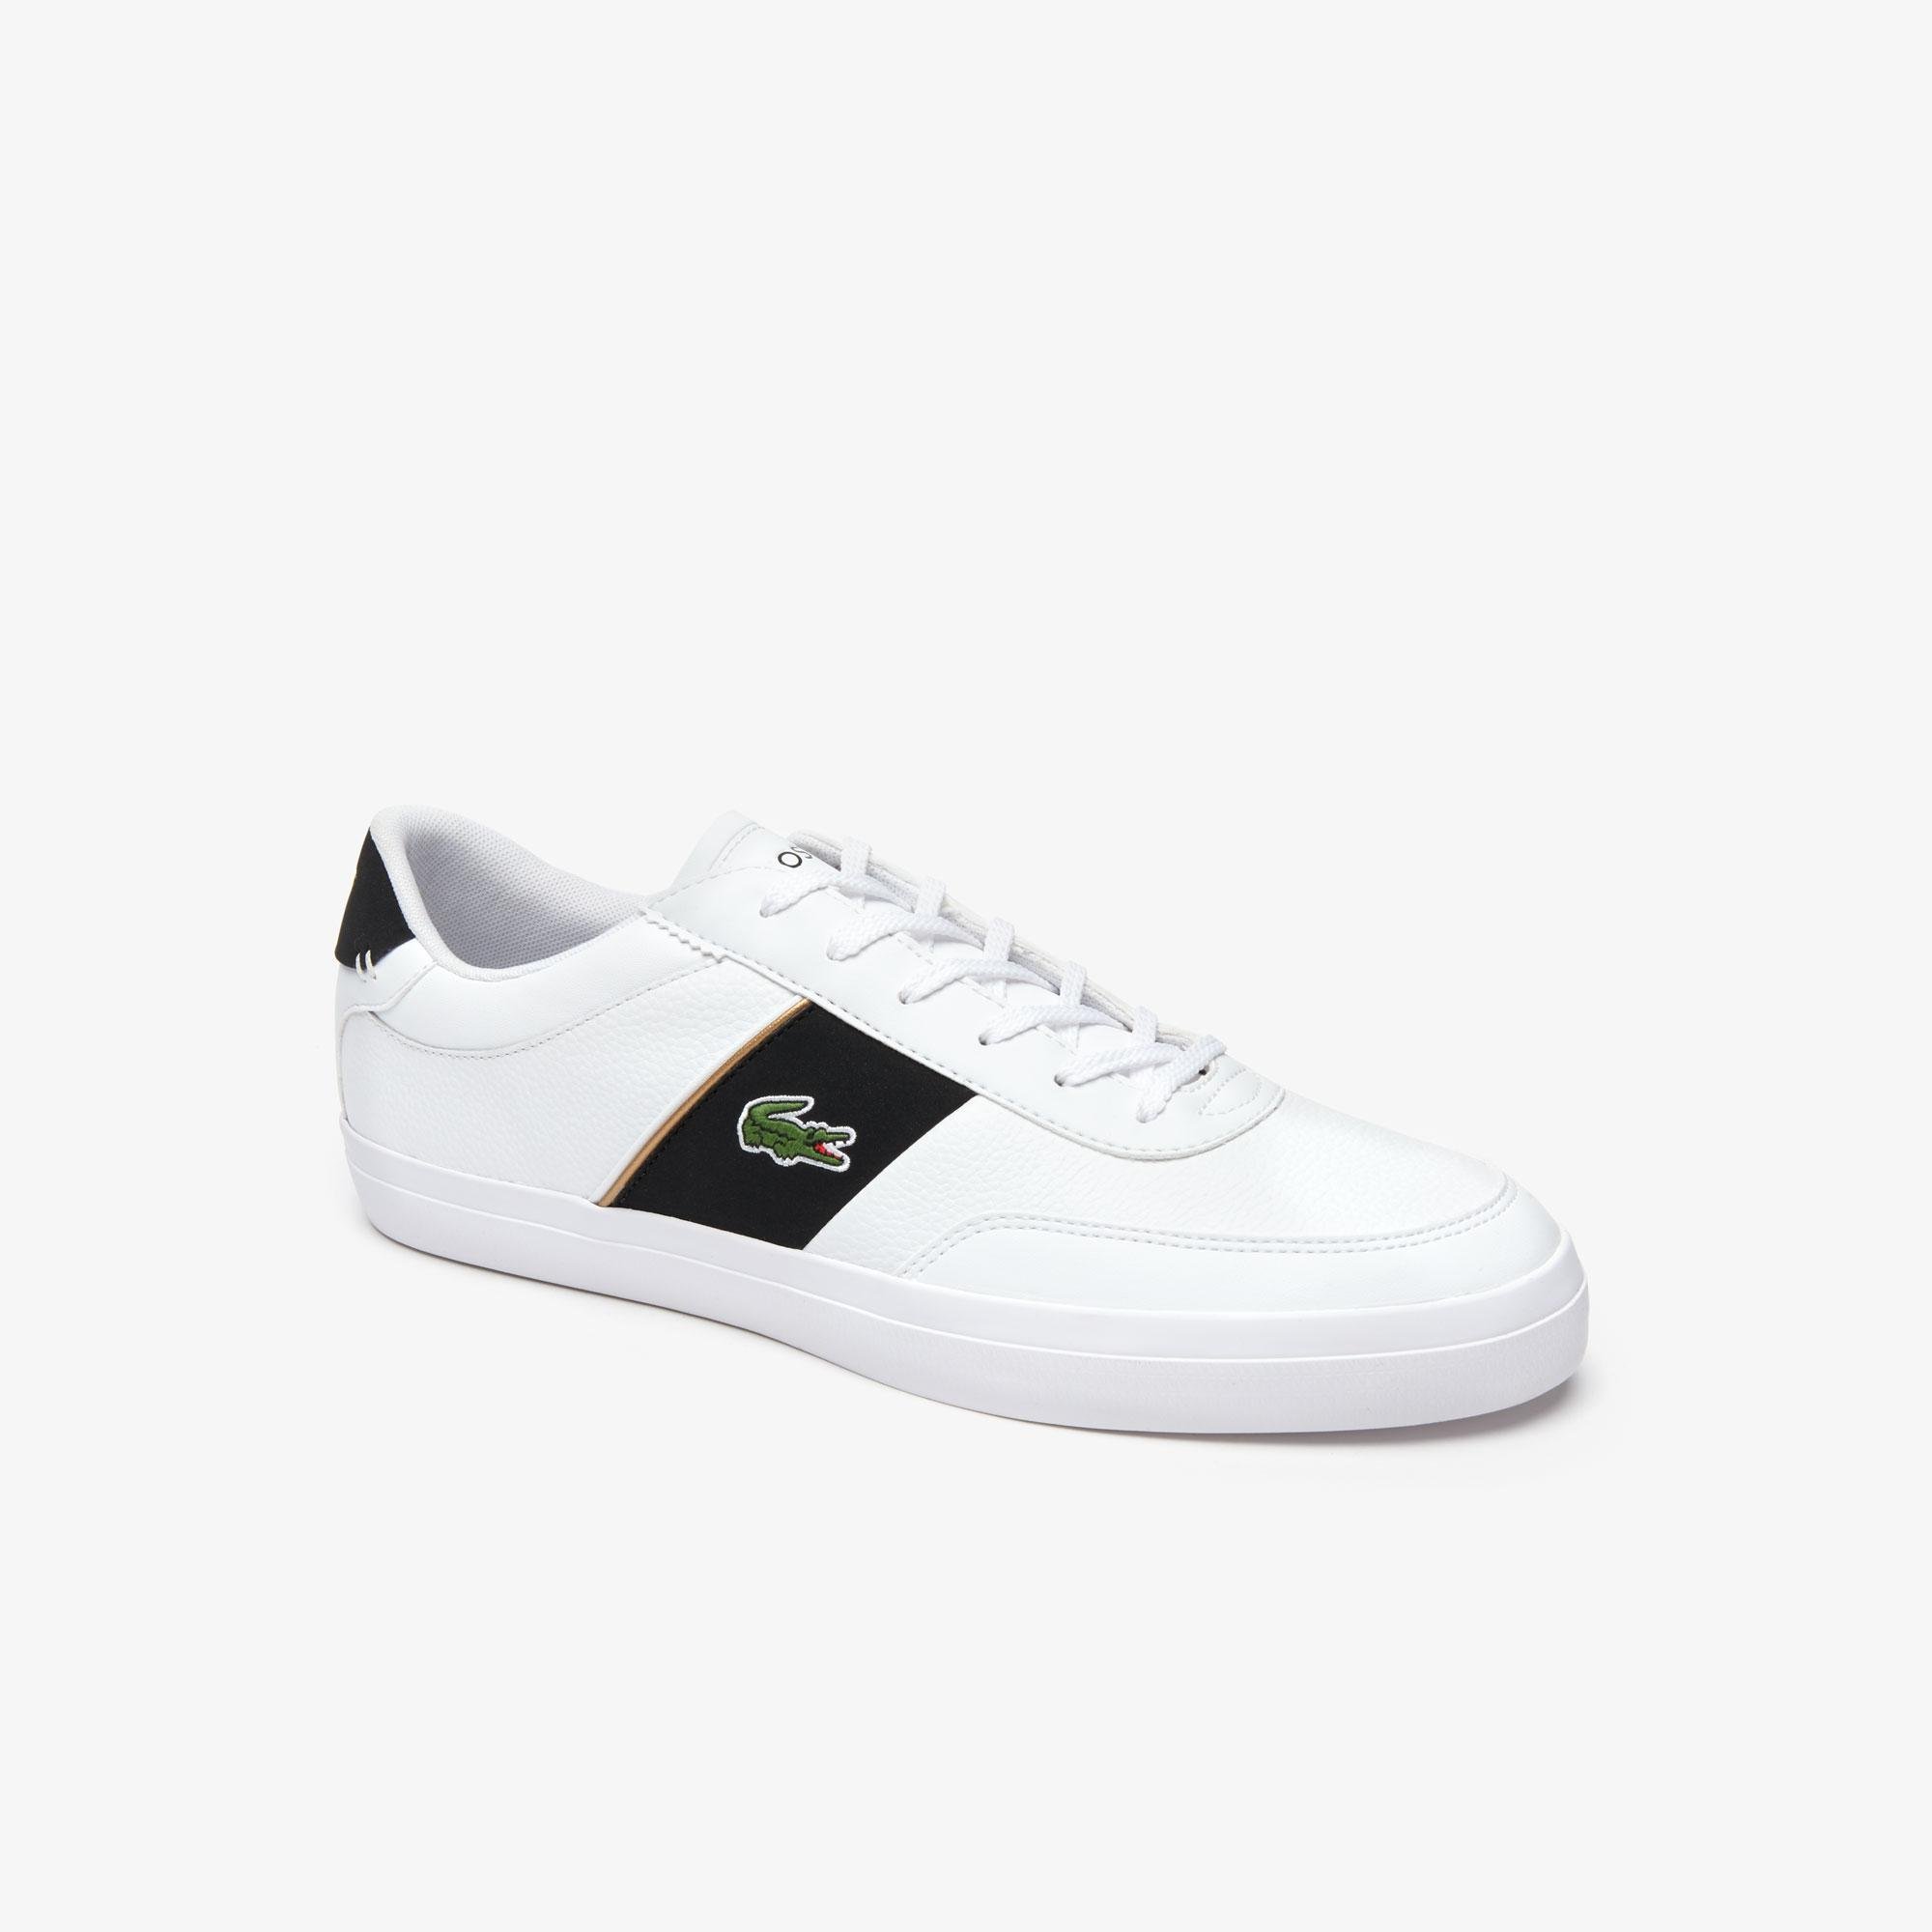 Shop LACOSTE Casual Style Street Style Leather Low-Top Sneakers  (7-42CFA0022) by ムロバ | BUYMA